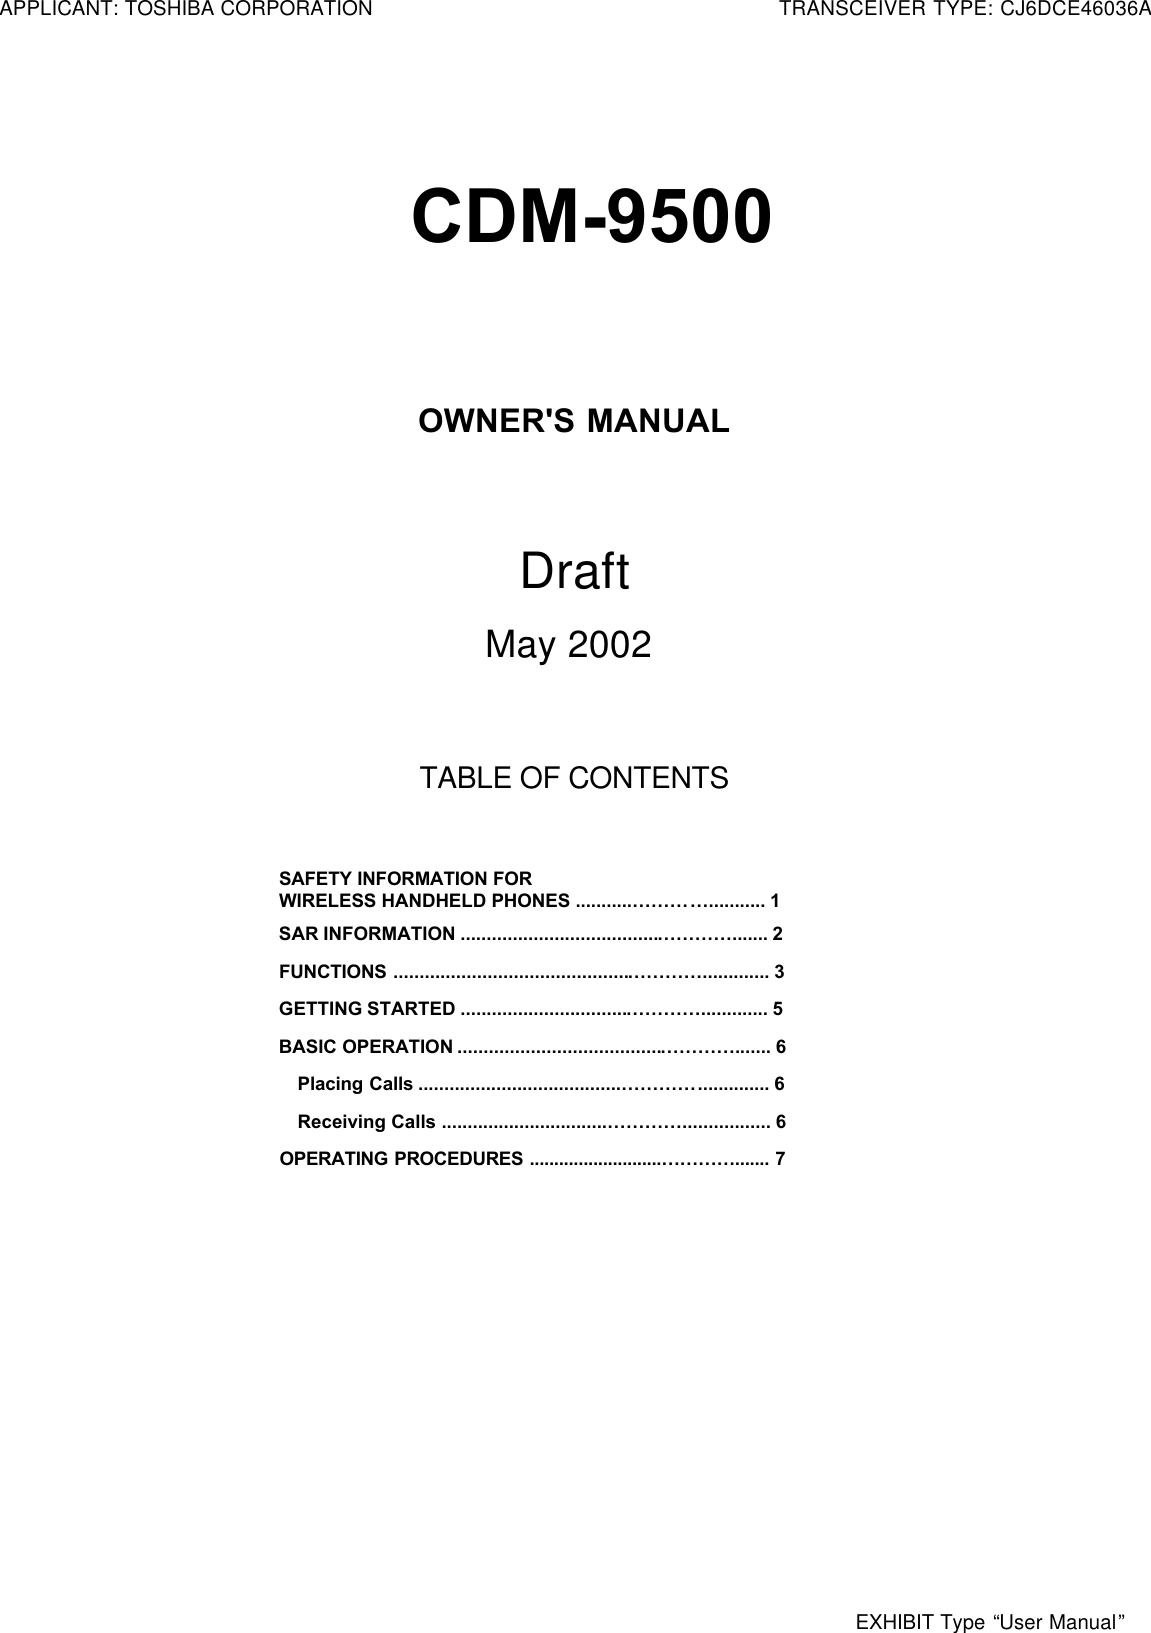 CDM-9500OWNER&apos;S MANUALDraft    May 2002TABLE OF CONTENTSSAFETY INFORMATION FORWIRELESS HANDHELD PHONES ...........…………........... 1SAR INFORMATION ......................................…………....... 2FUNCTIONS .............................................…………............. 3GETTING STARTED ................................…………............. 5BASIC OPERATION .......................................…………....... 6Placing Calls .......................................………….............. 6Receiving Calls ................................…………................. 6OPERATING PROCEDURES ...........................…………....... 7APPLICANT: TOSHIBA CORPORATIONTRANSCEIVER TYPE: CJ6DCE46036AEXHIBIT Type “User Manual”